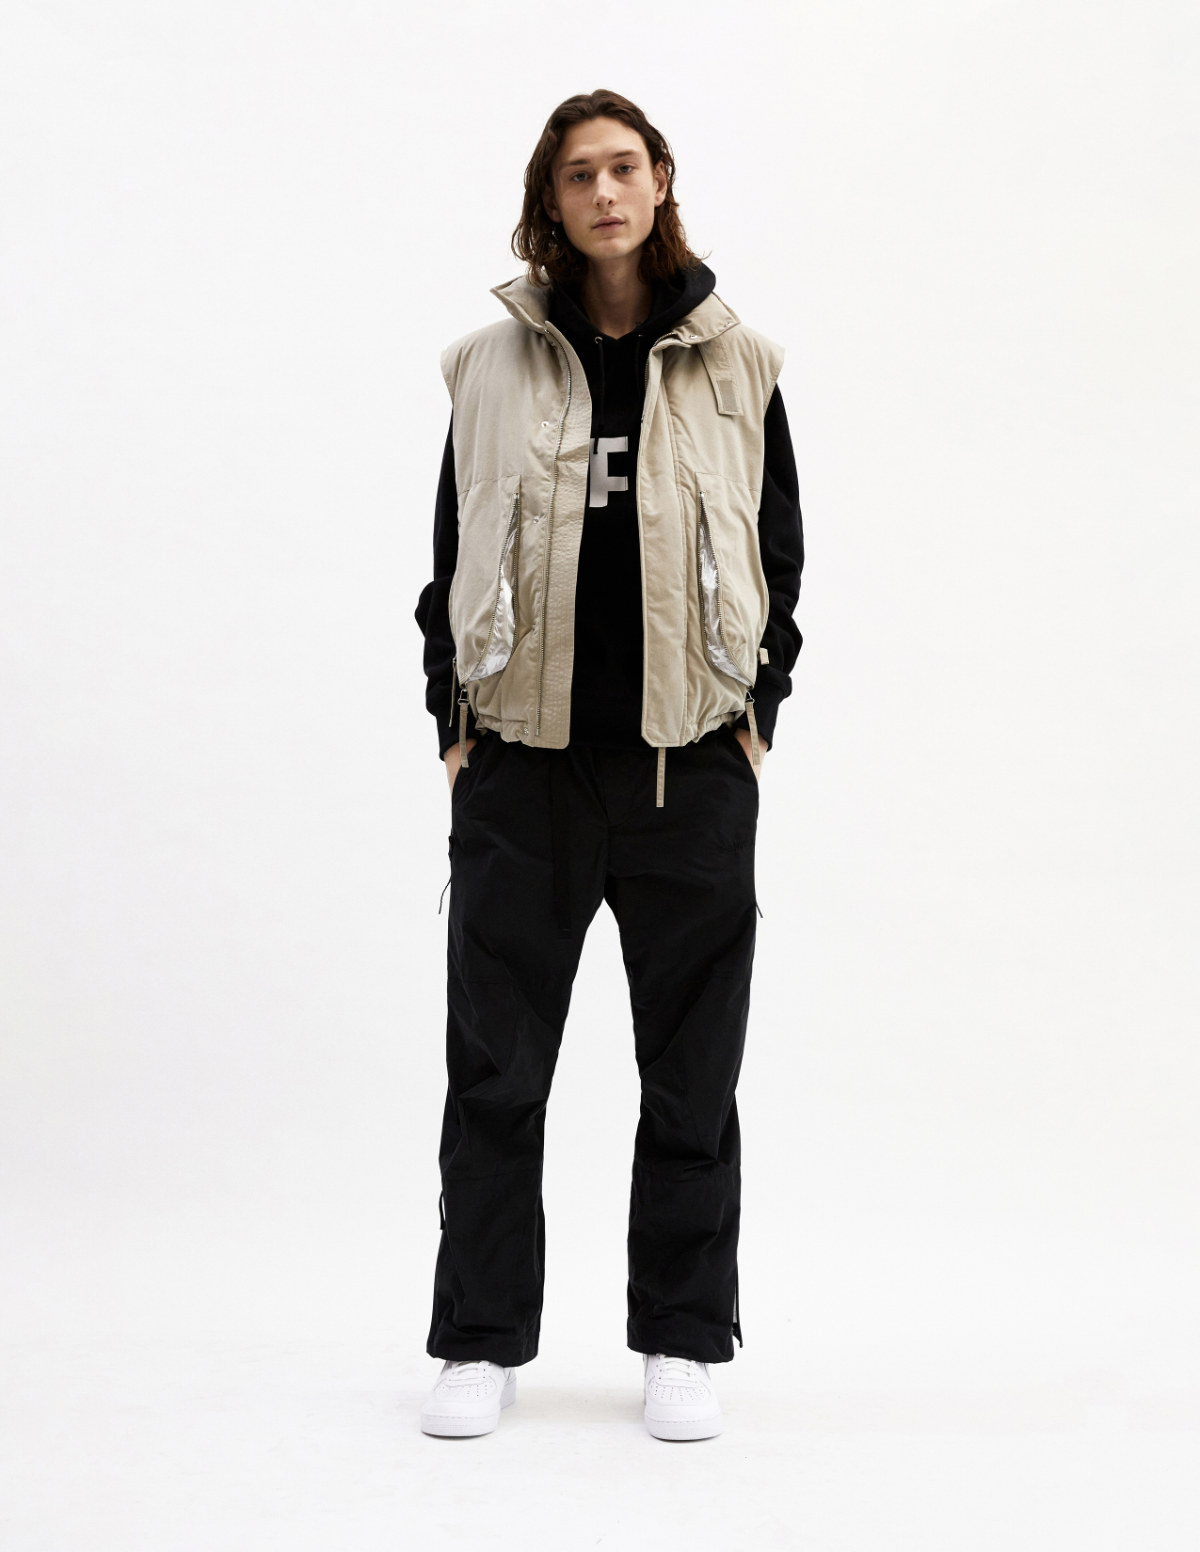 Helmut Lang’s Autumn/Winter 2021 Collection